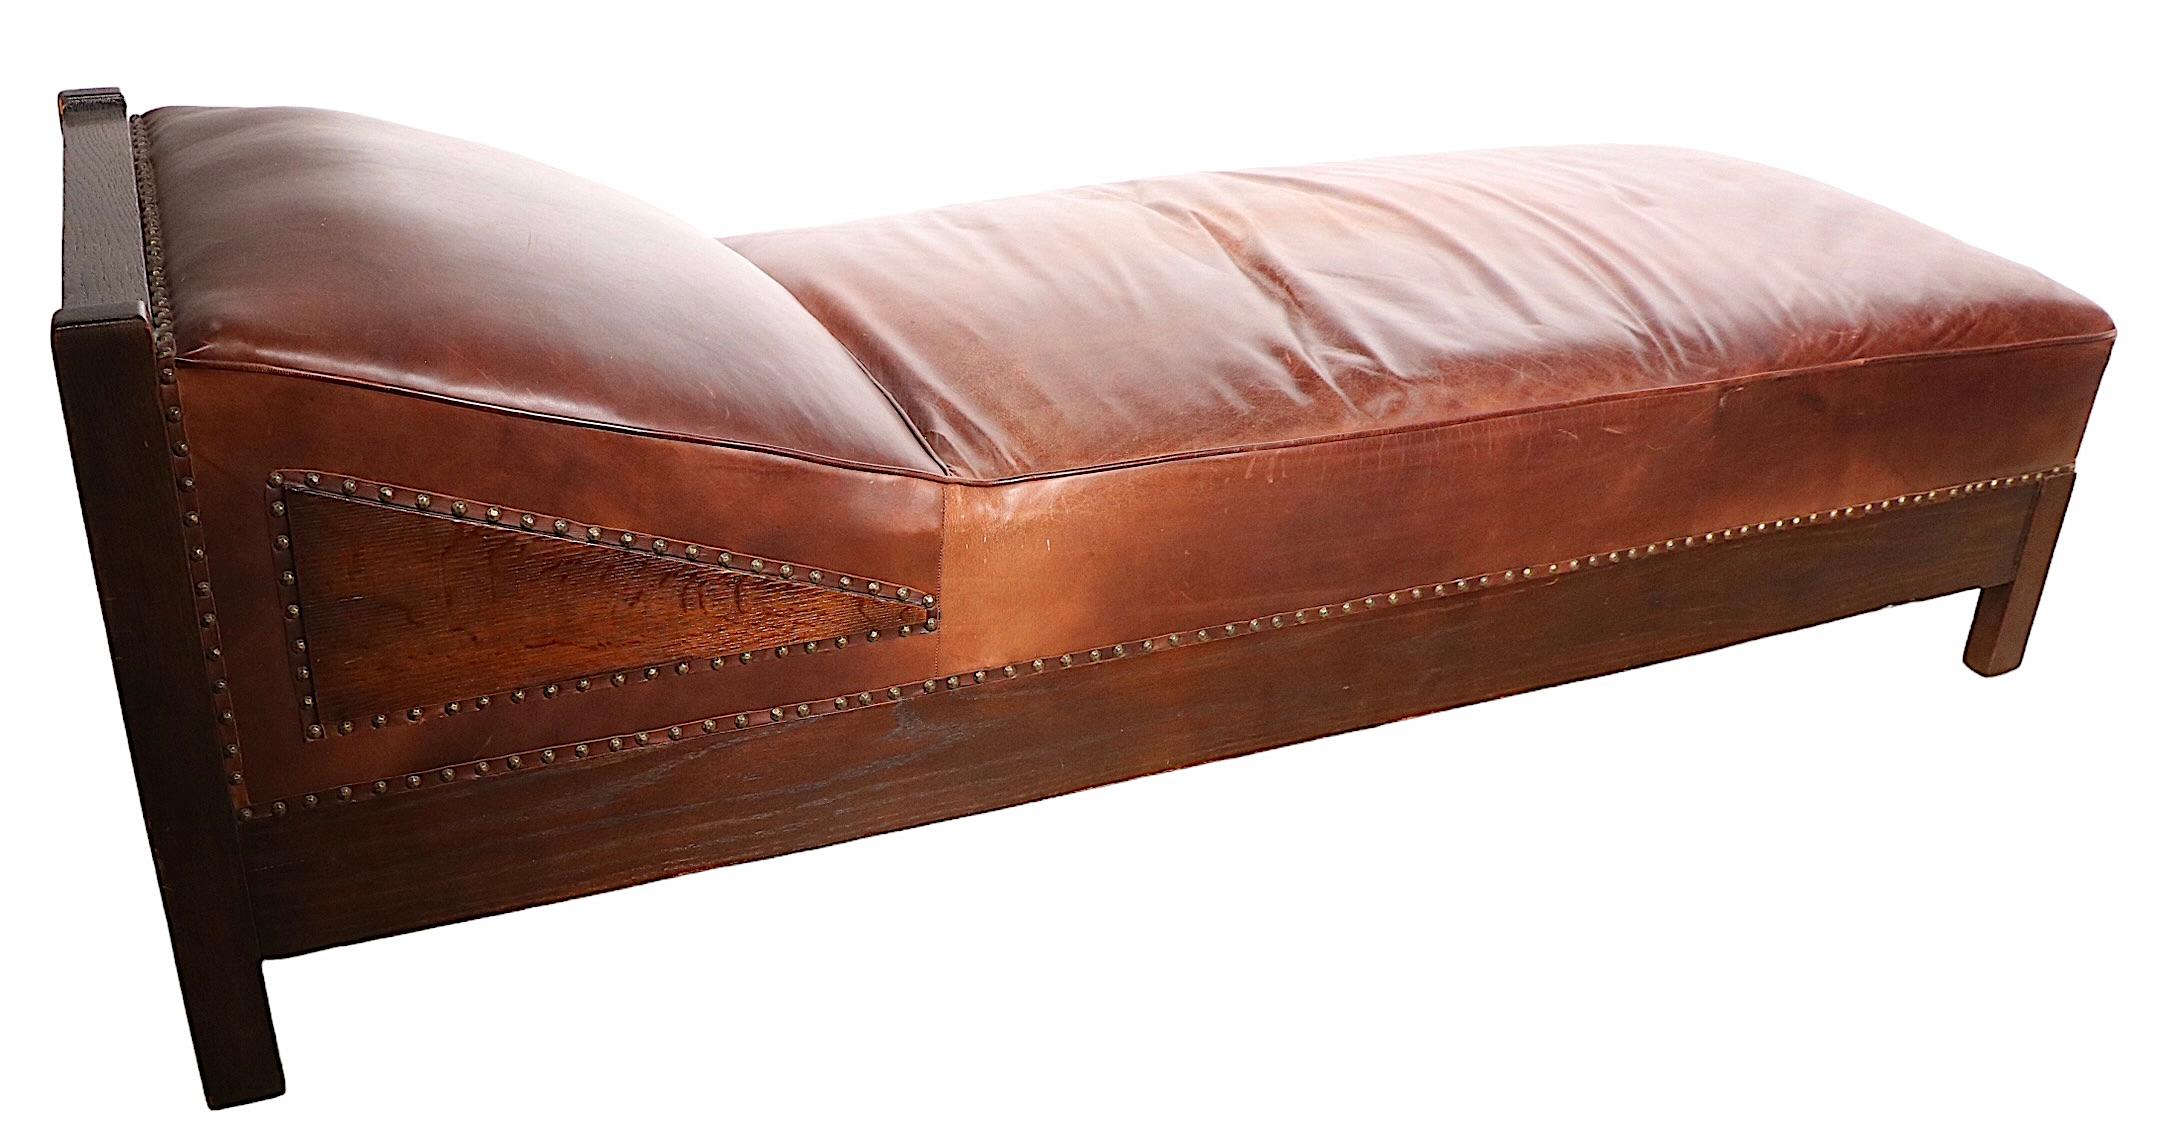 Oak and Leather Arts and Crafts Mission Daybed Chaise Lounge c. 1900 -1920's 11